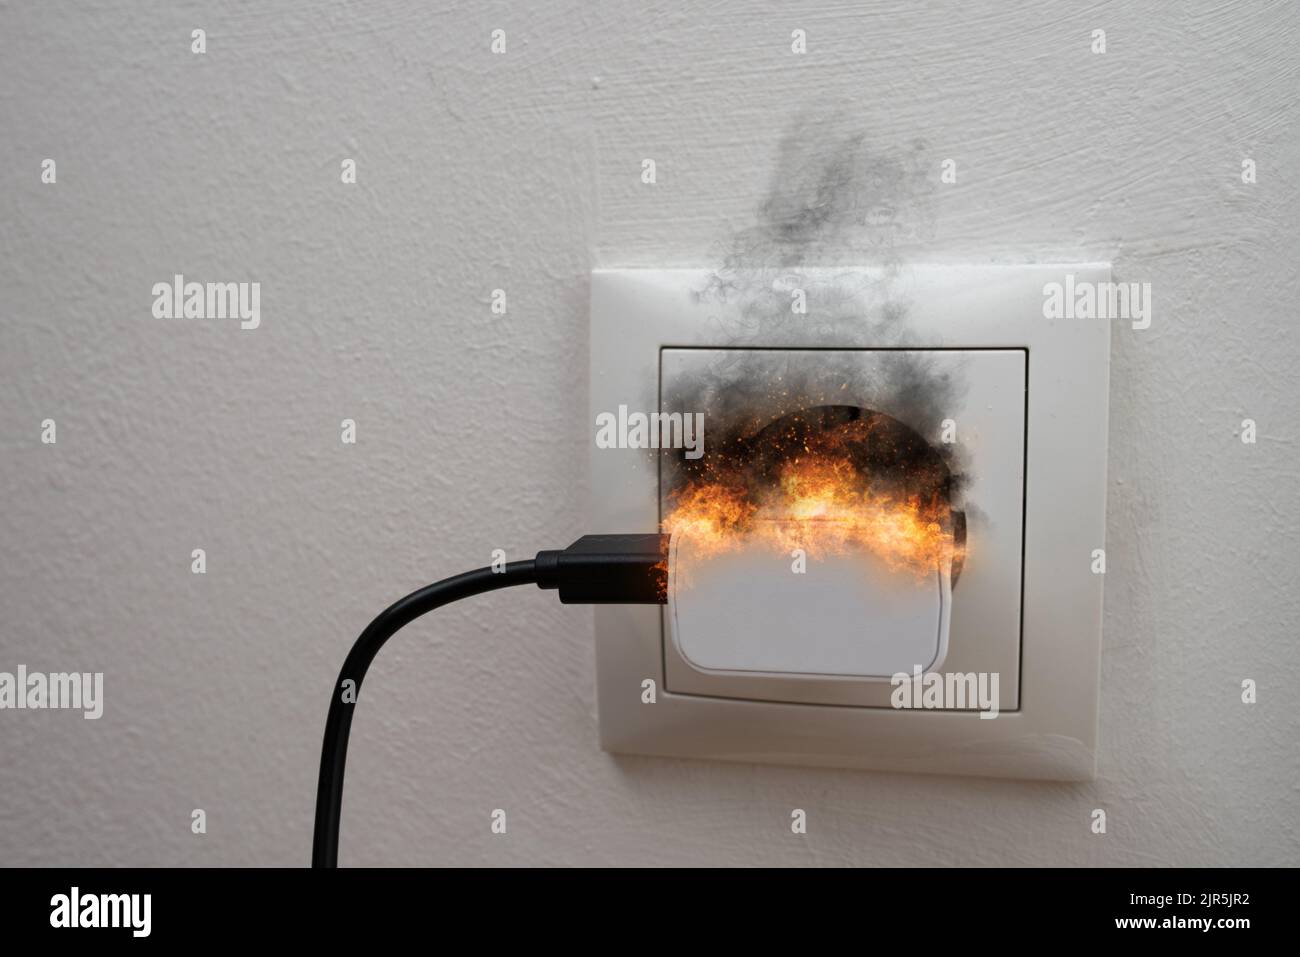 black smoke and sparks coming from charger plugged into wall socket, fire hazard concept Stock Photo